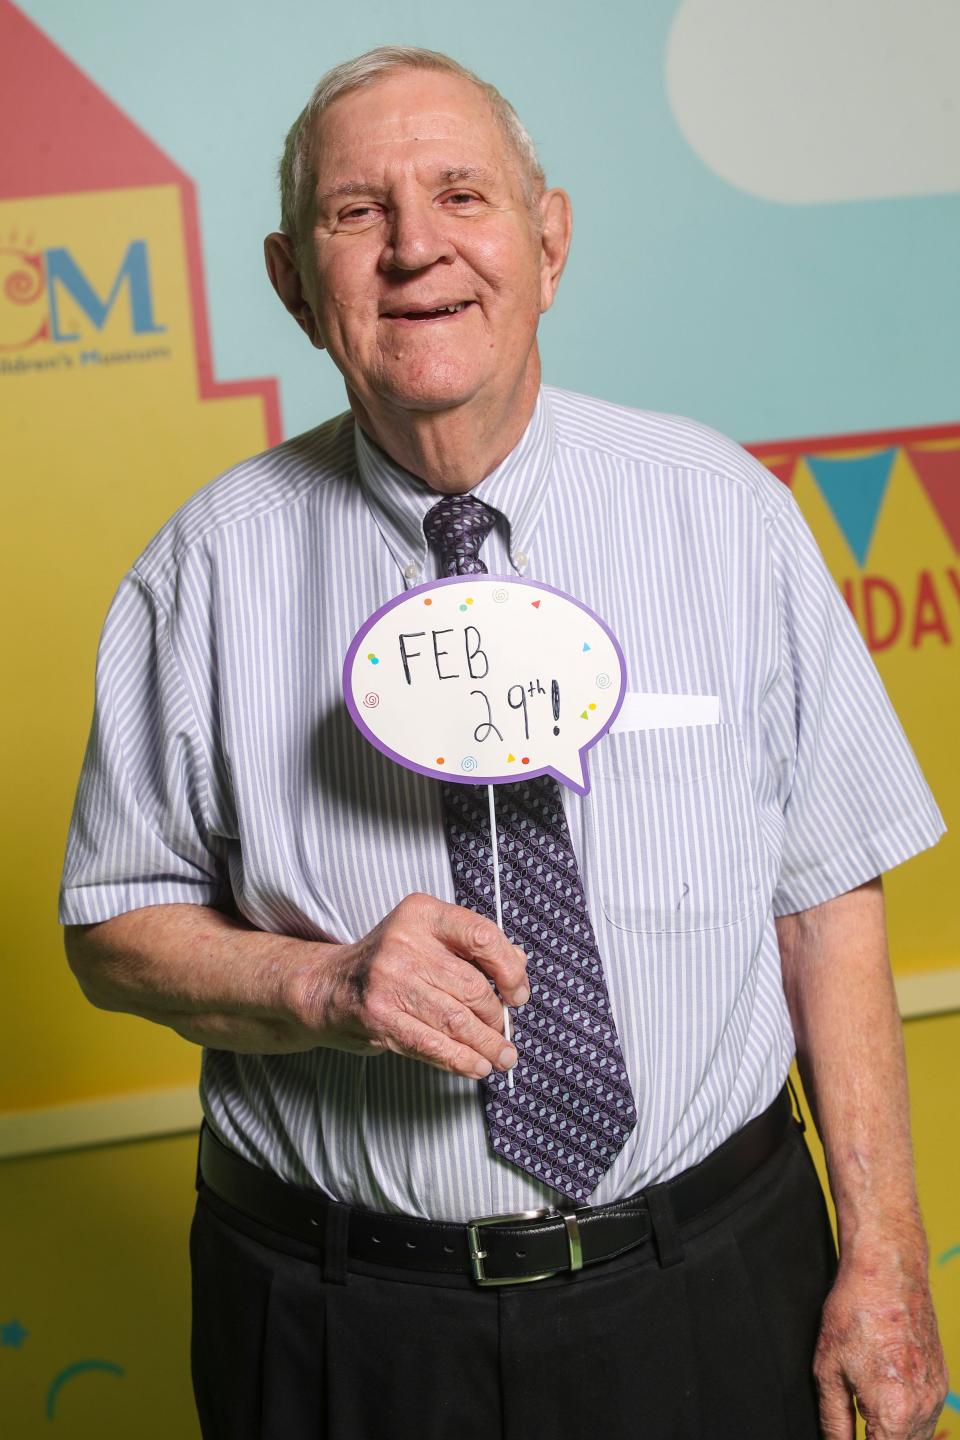 John Conly is celebrating his 20 leap day birthday this year. He's photographed at the Delaware Children's Museum.